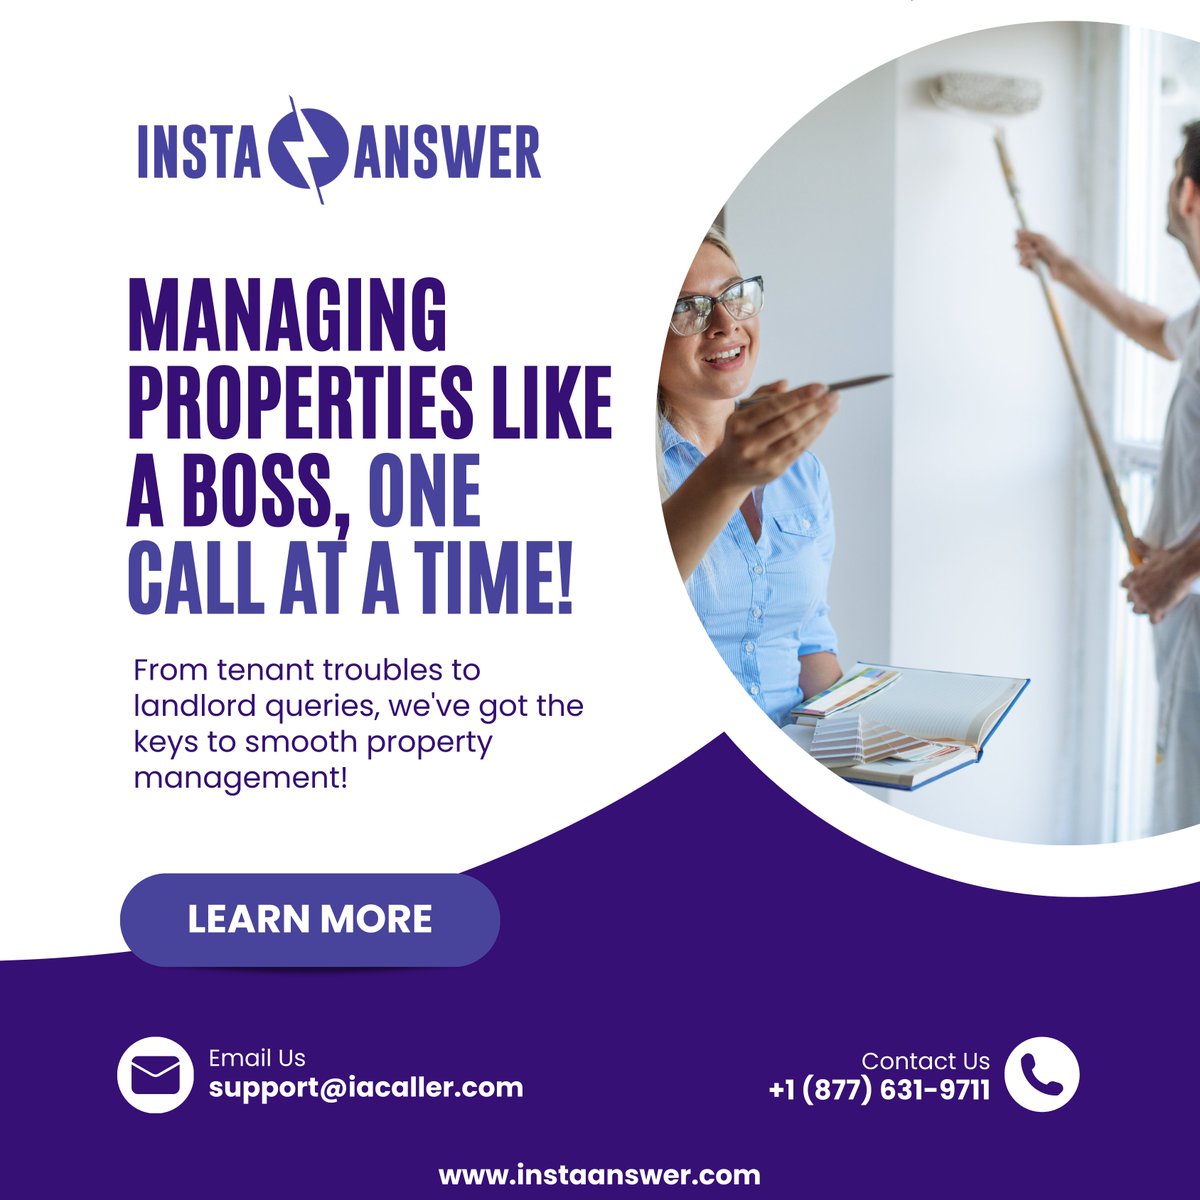 Managing properties like a boss? Our answering service for property management companies ensures your calls and customer service are as smooth as a lease signing.

Dial (877) 631-9711 or email support@iacaller.com to let us handle the keys to your success!

#InstaAnswer #CSR